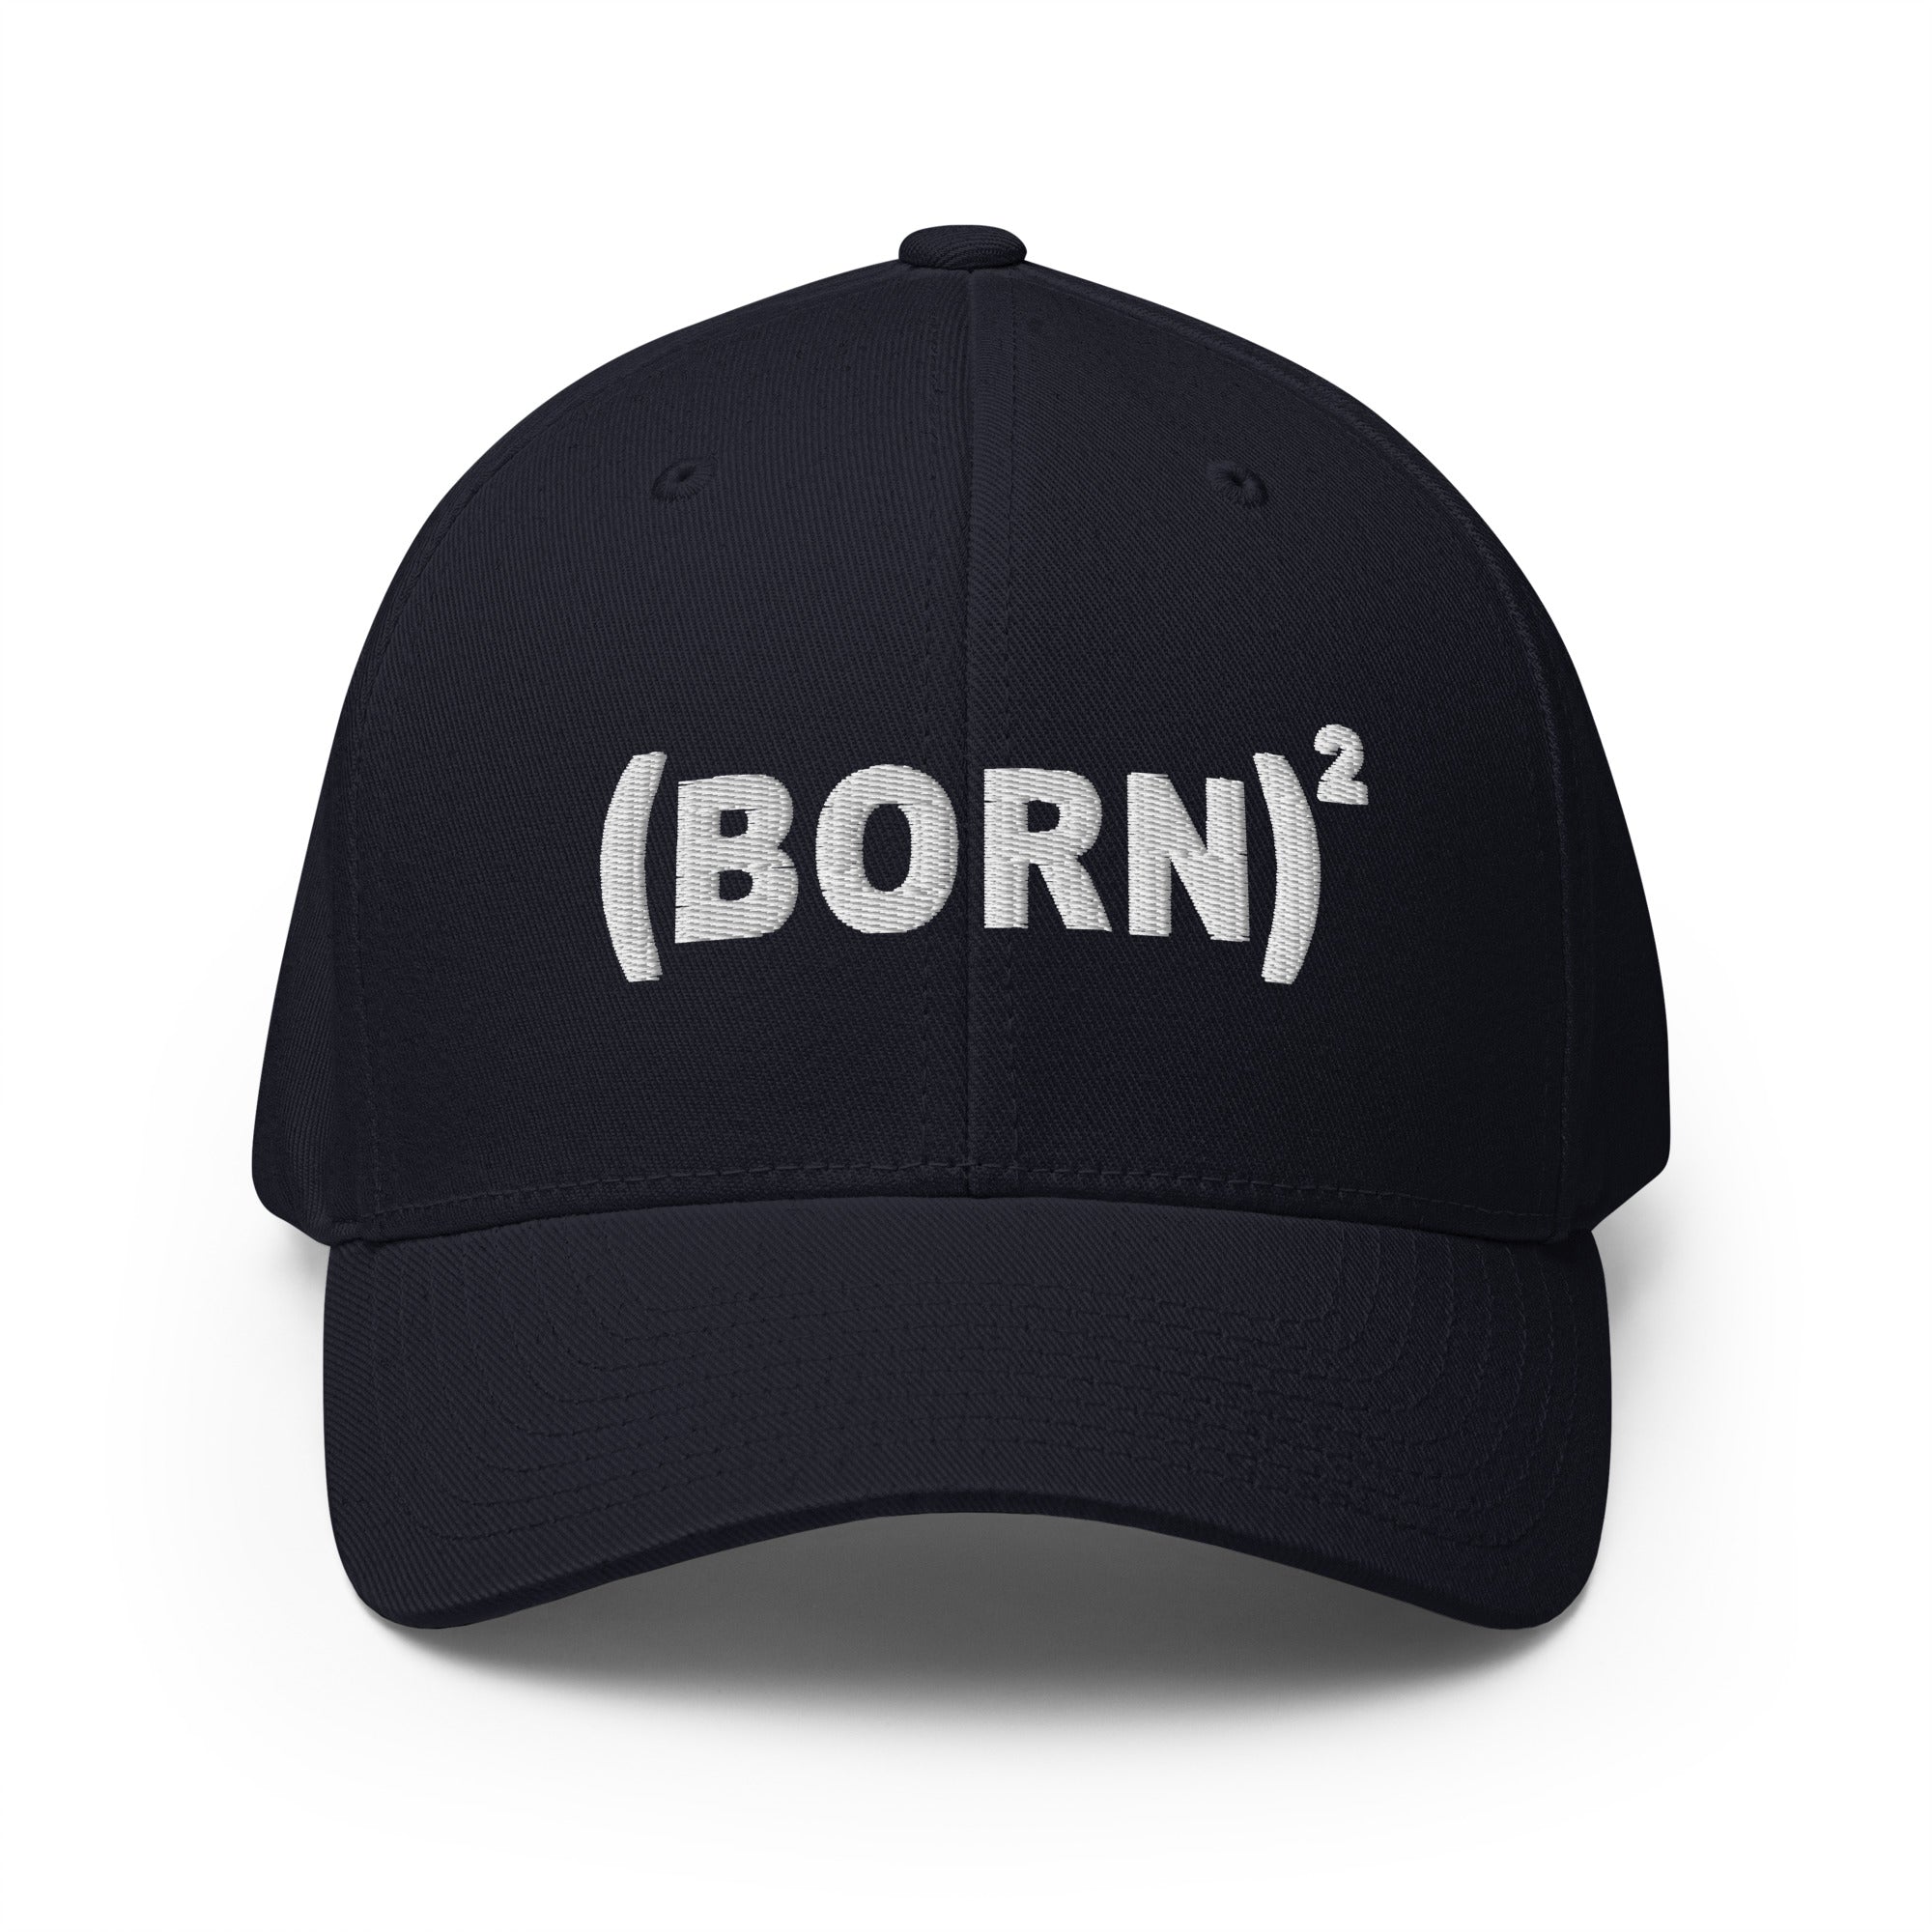 Born Again, White Thread Embroidered Flex Fitted Cap - Christian Hat